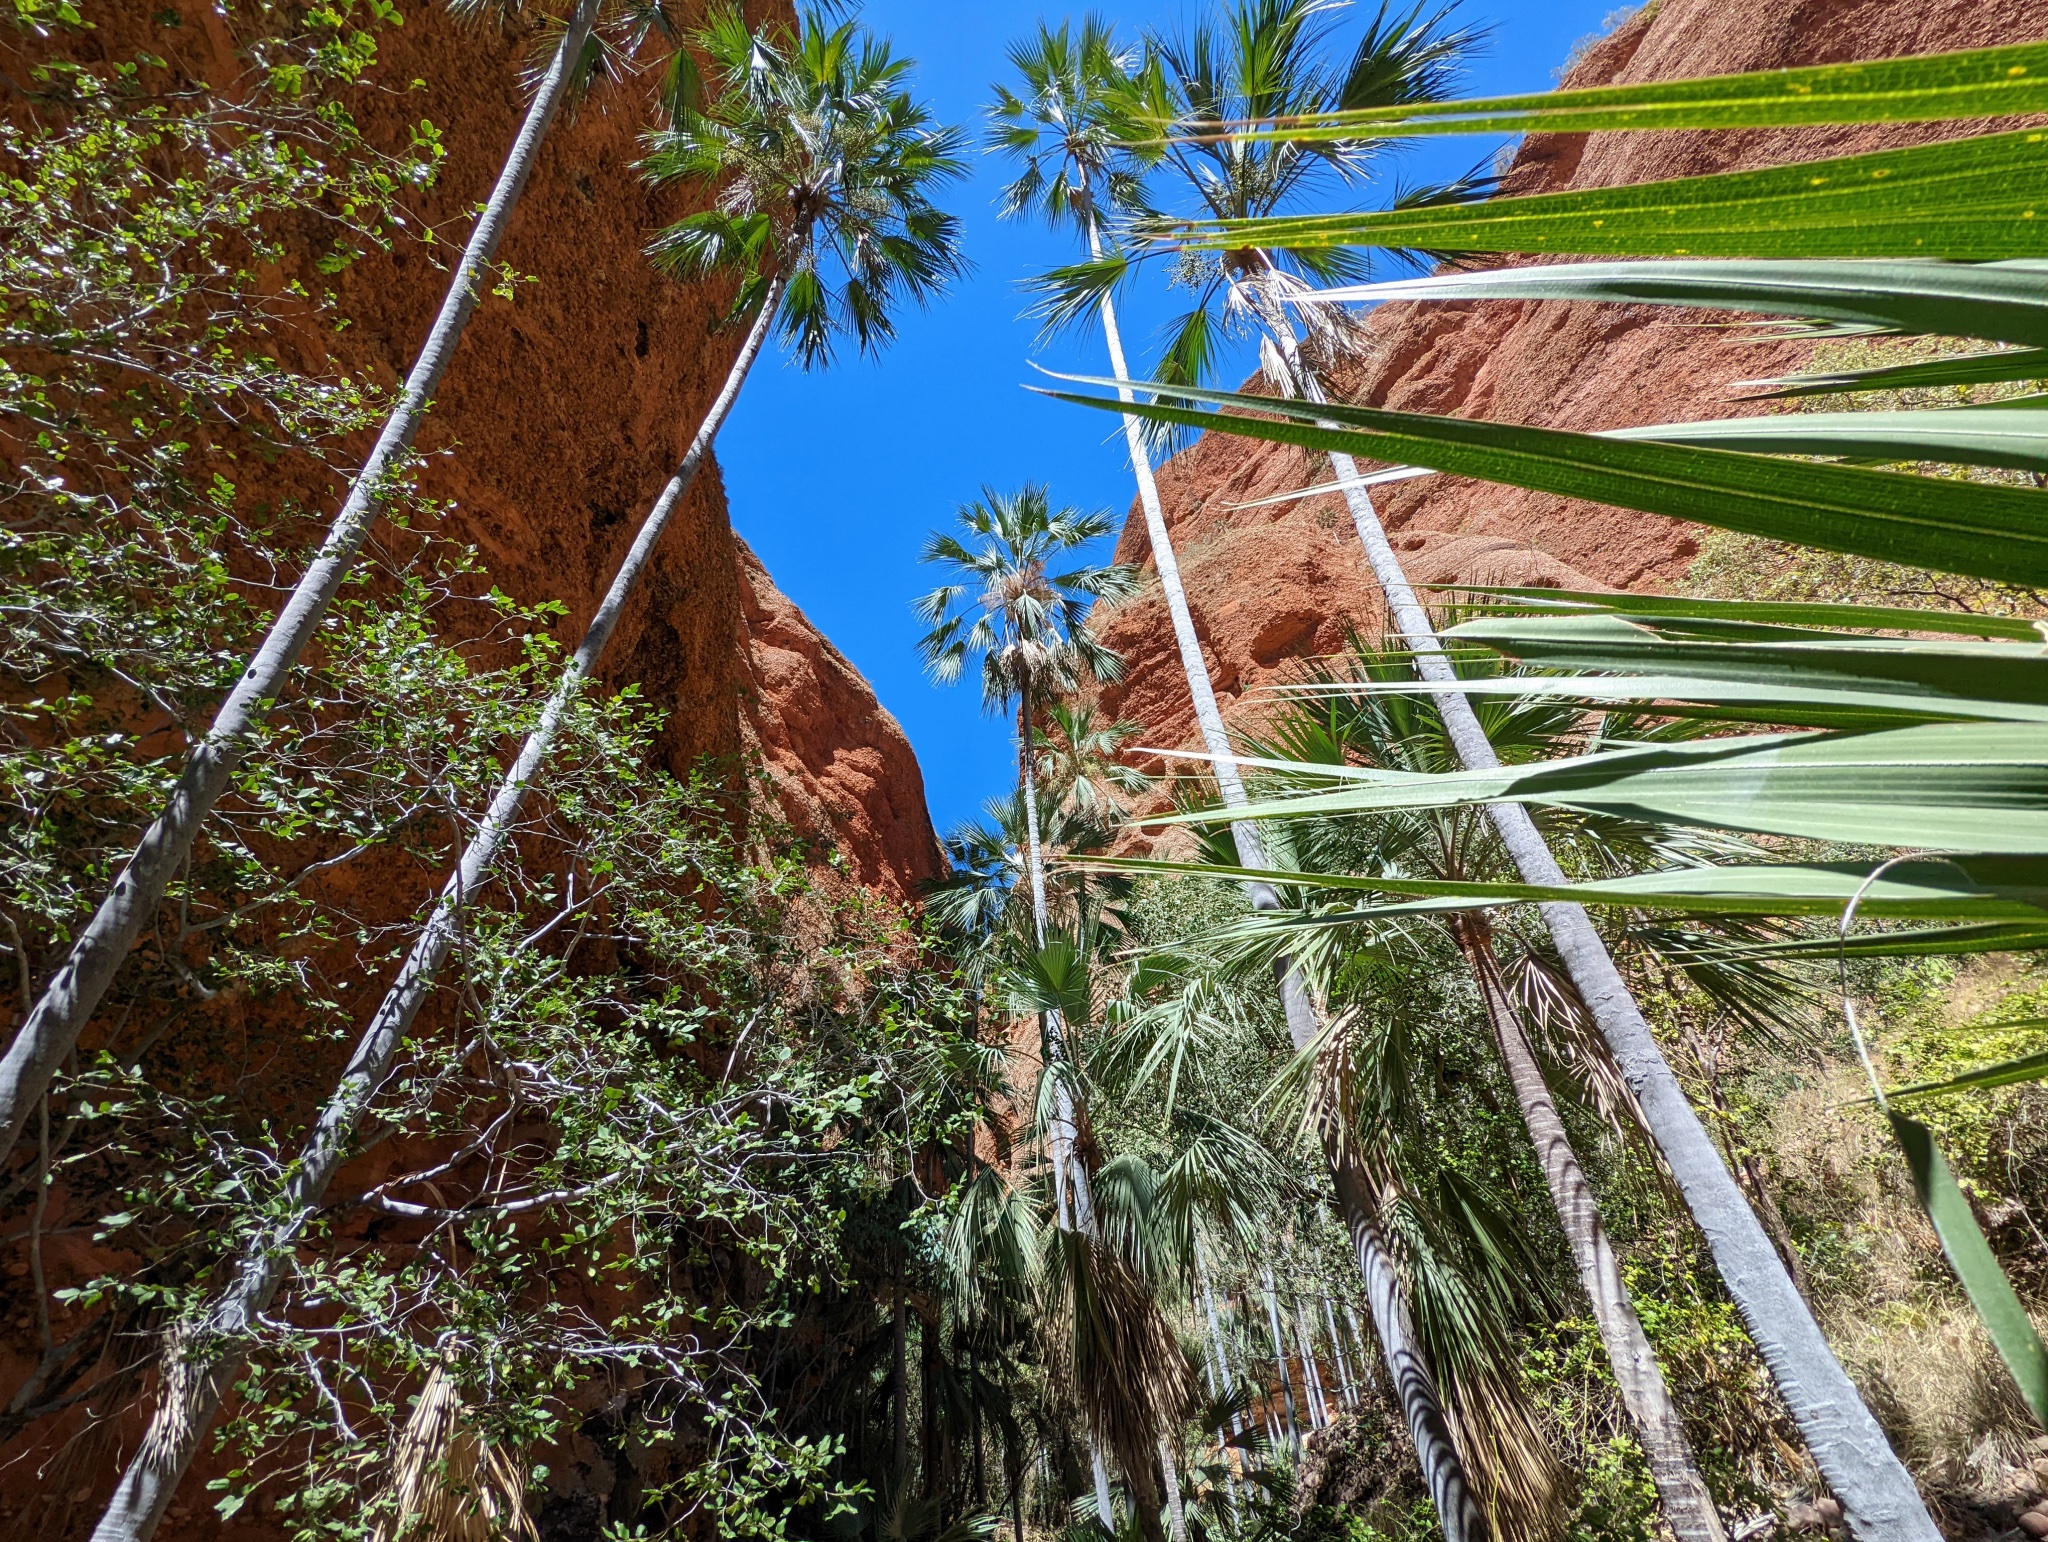 Sharp valley cut into the rock with palms growing inside